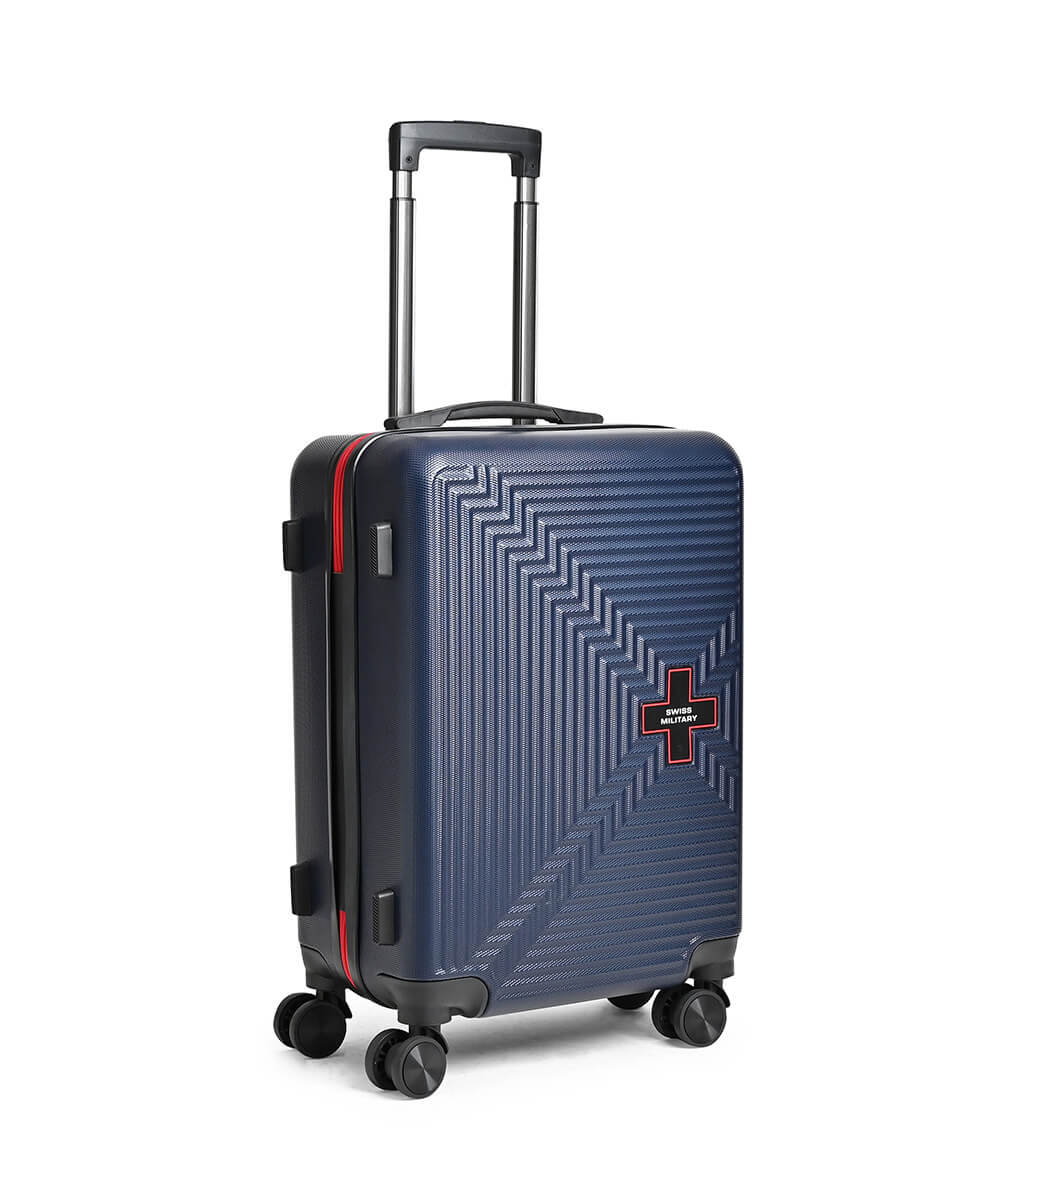 Luggage - Suitcases and Trolleys Designed in Italy | Roncato